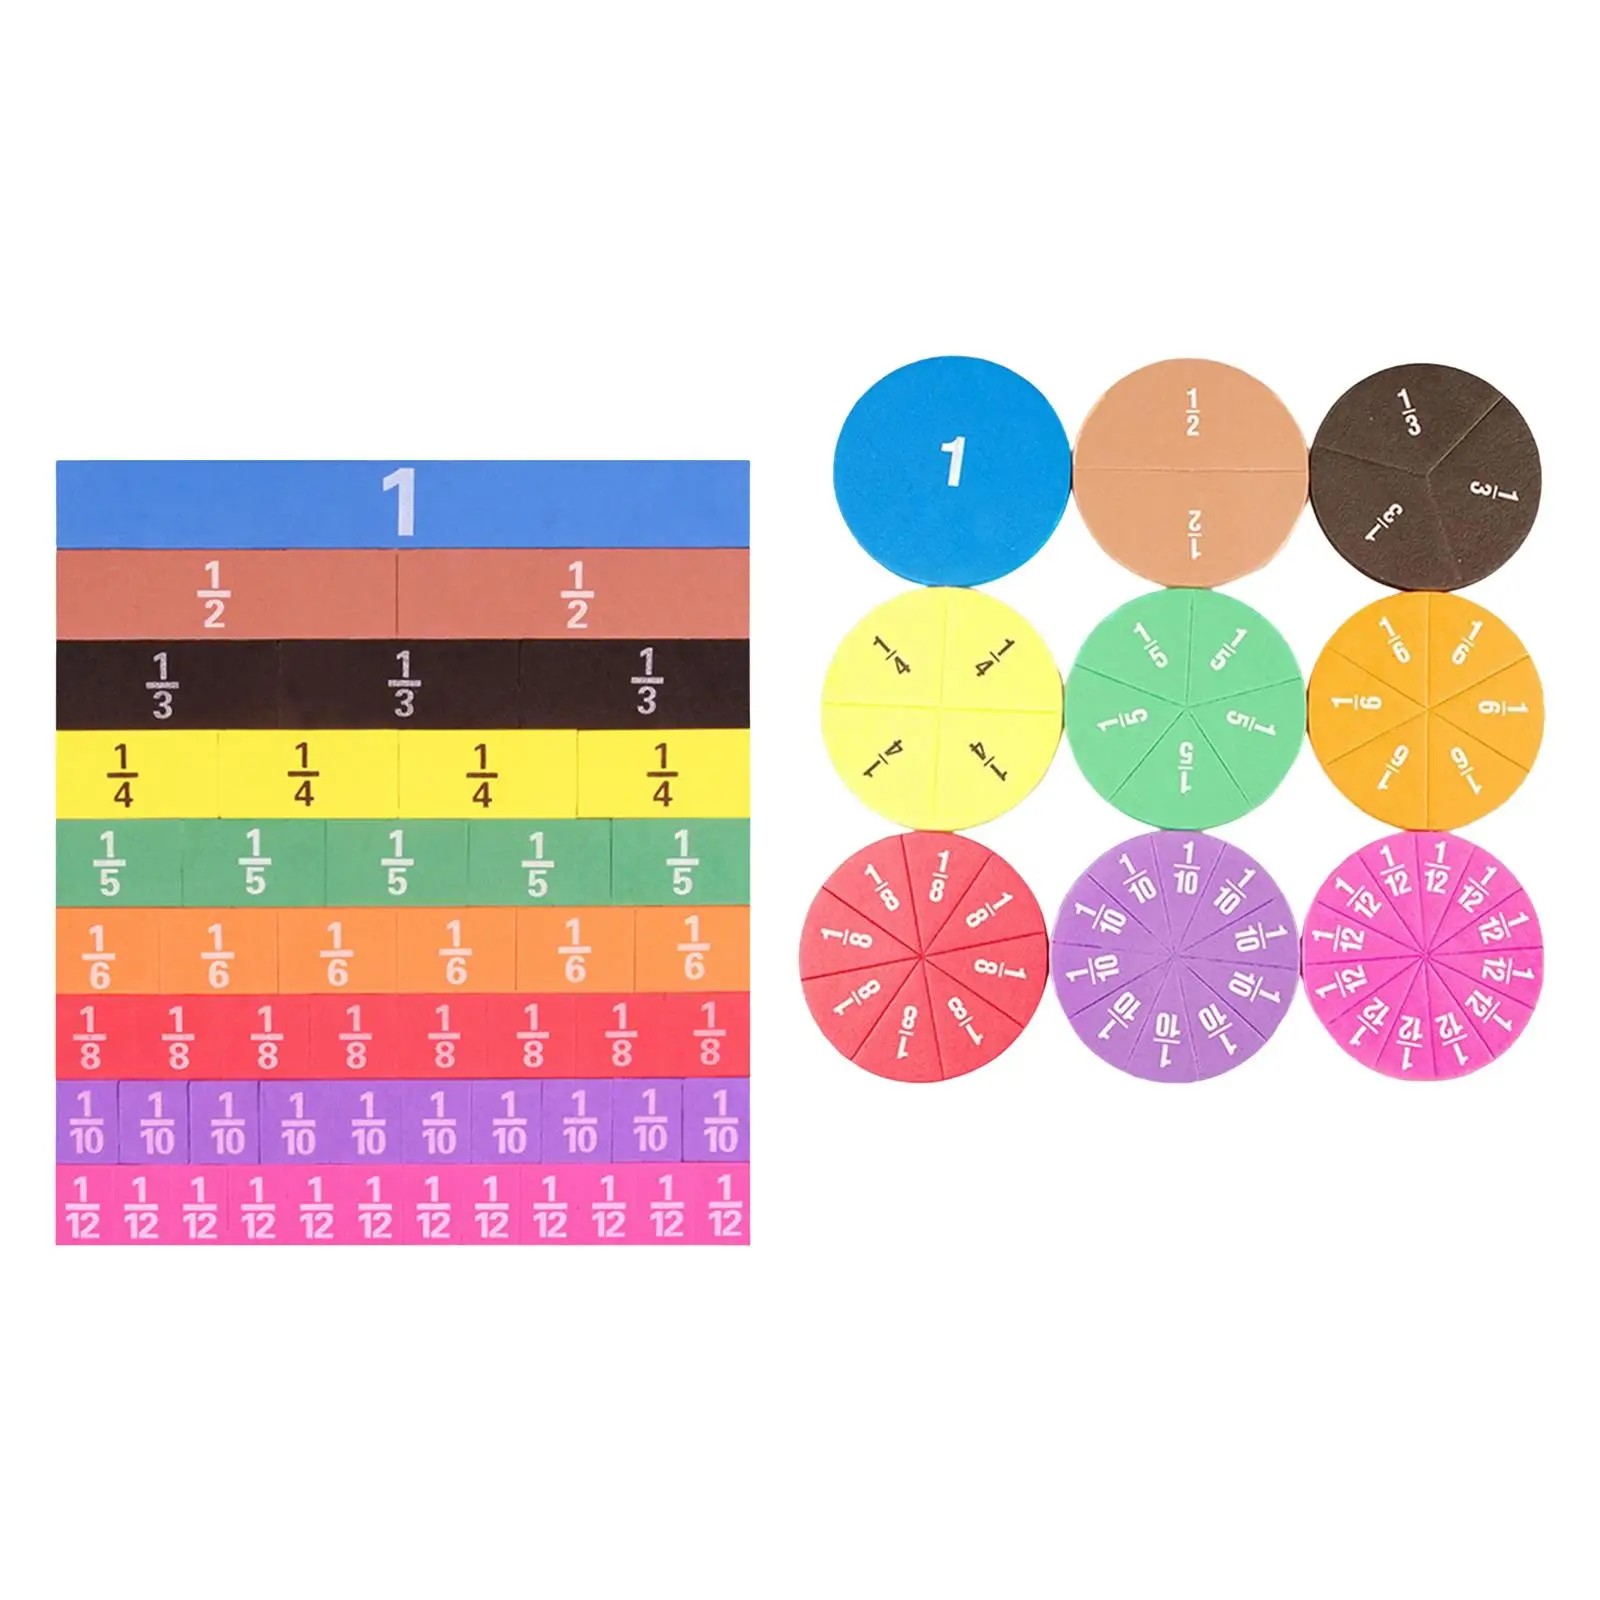 Fraction Strips and Circles Math Materials Counting Toy Manipulatives for Kids Children